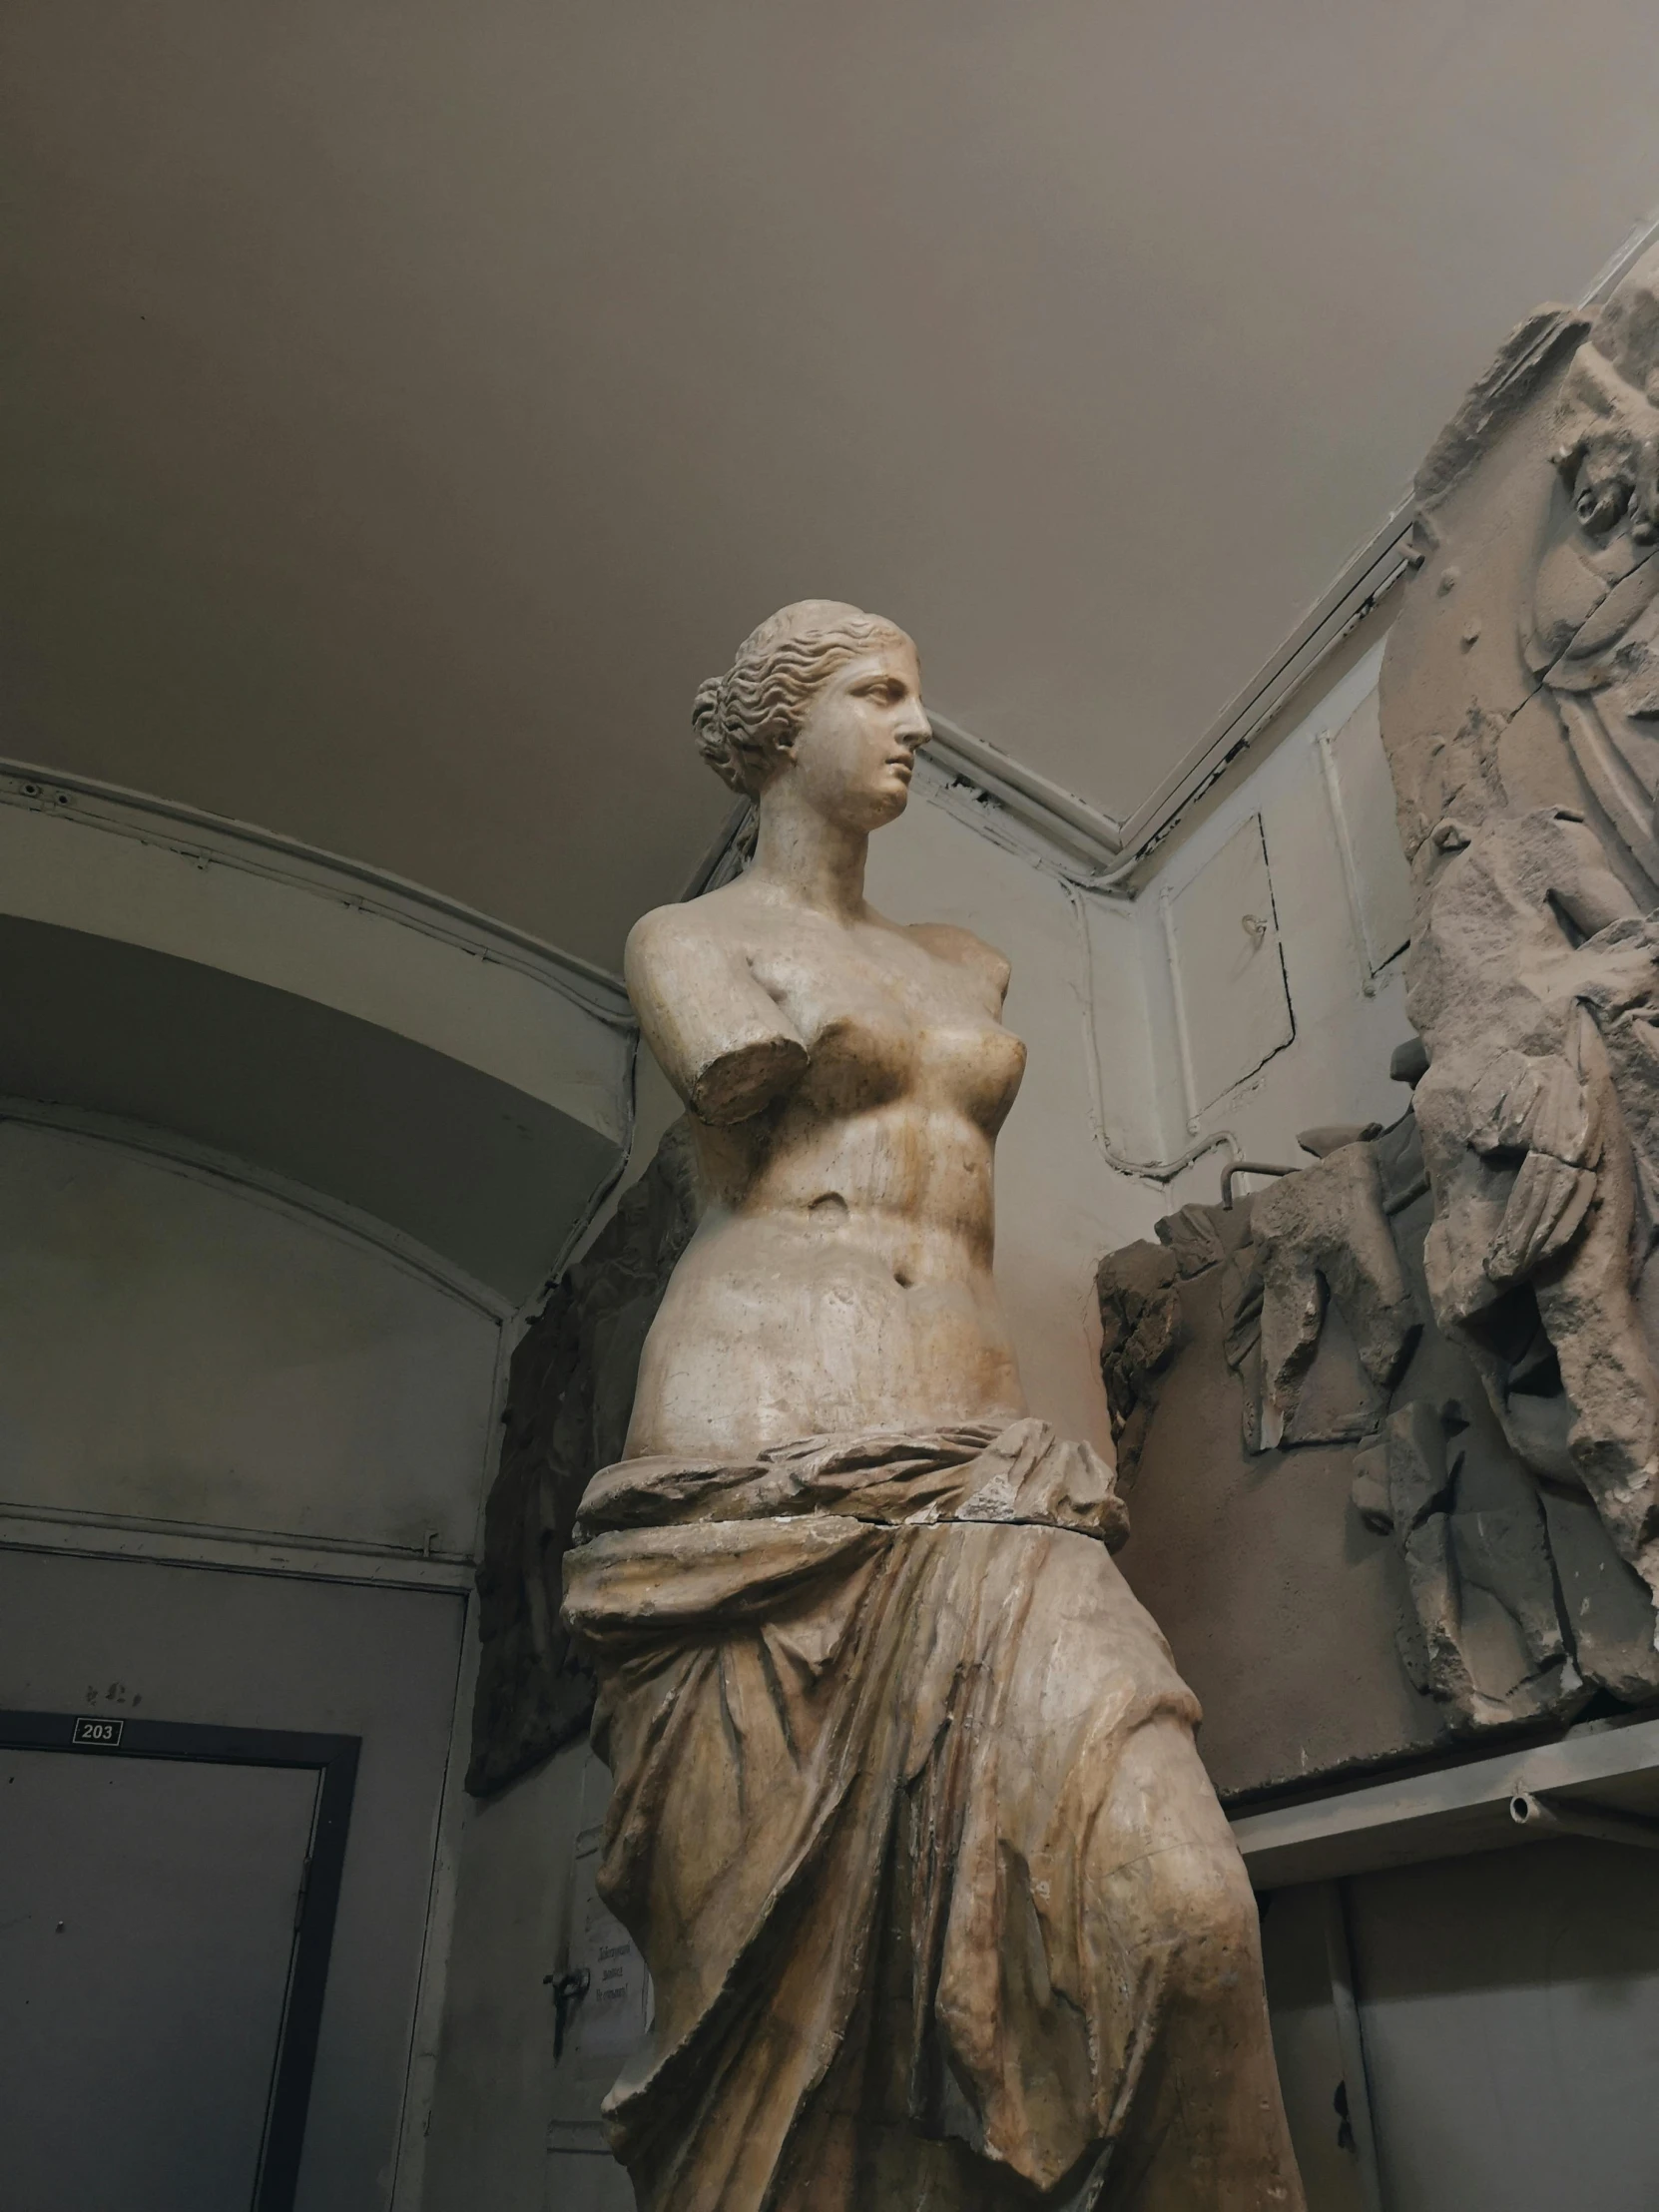 a statue of a woman standing next to a mirror, a statue, inspired by Antonio Canova, pexels contest winner, mannerism, venus de milo with arms, [sculpture] and [hyperrealism], inside building, grey